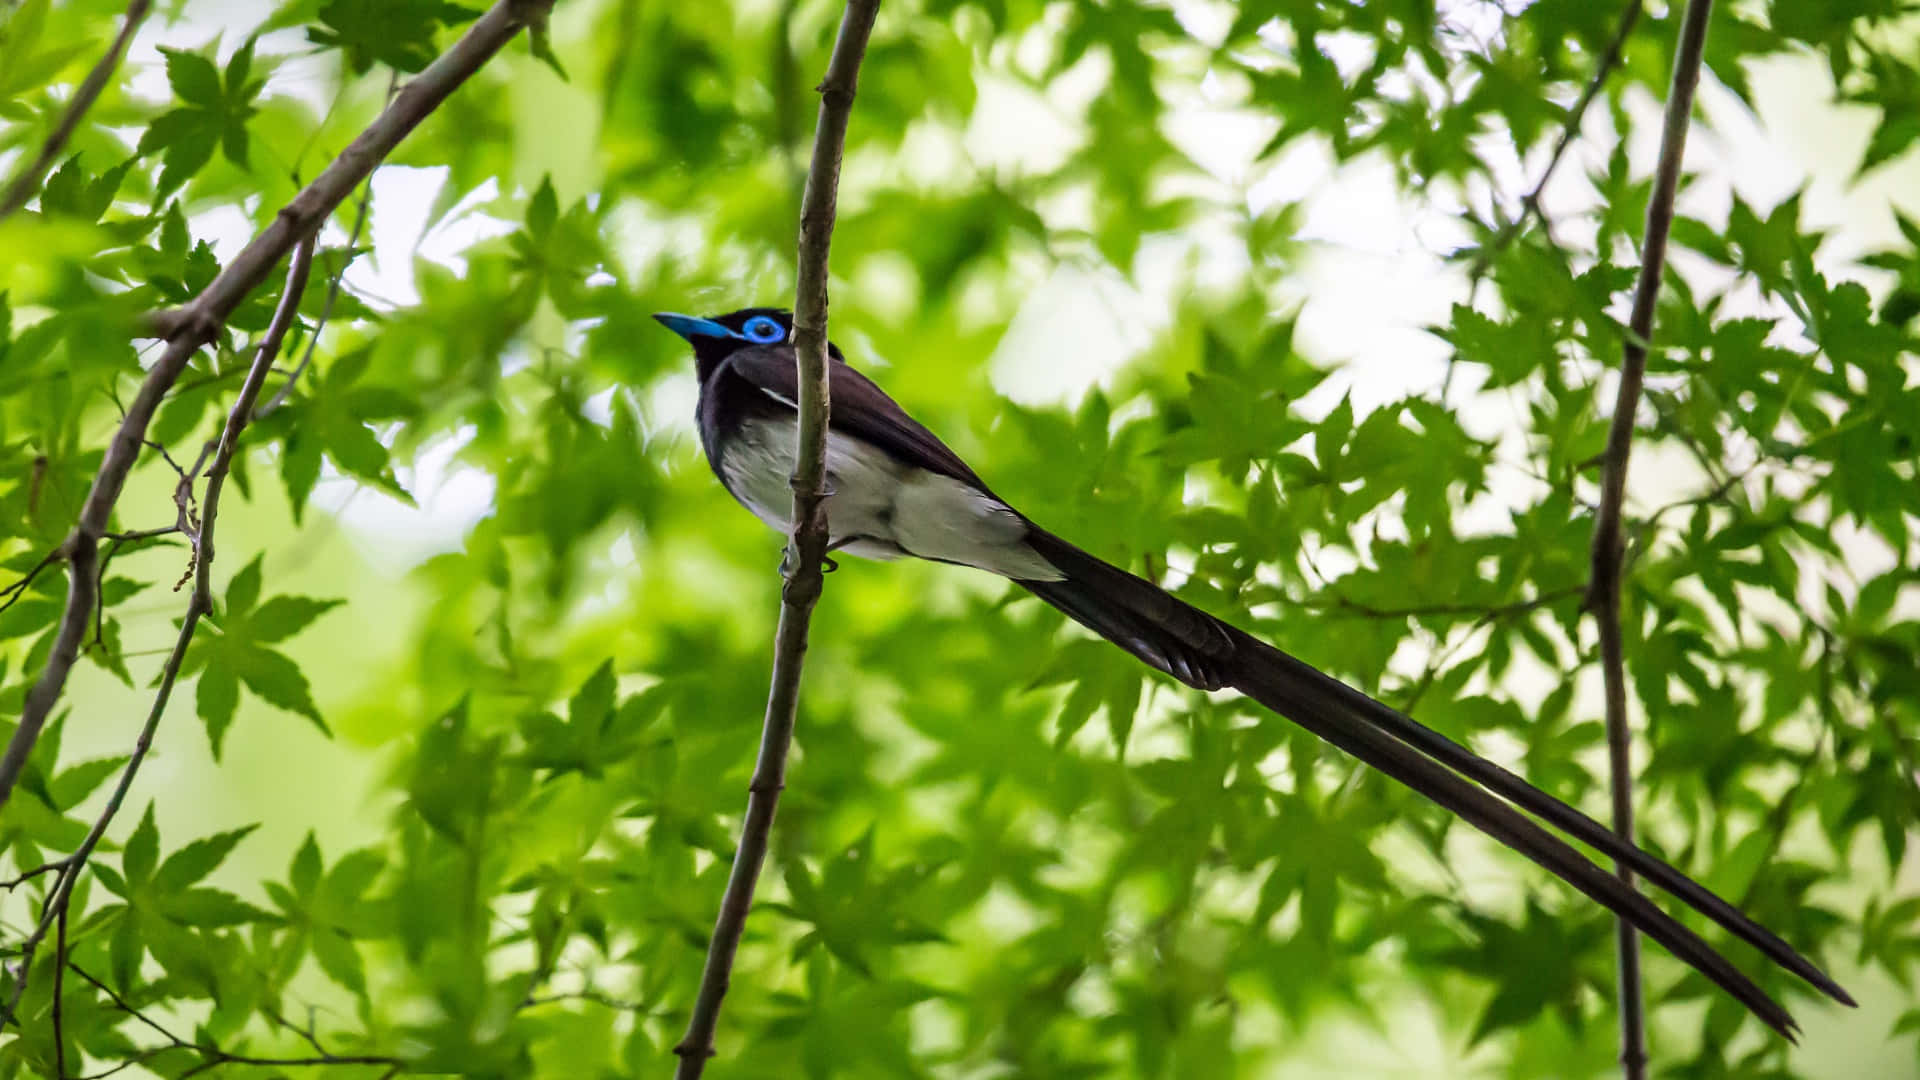 A Blue And Black Bird Perched On A Branch